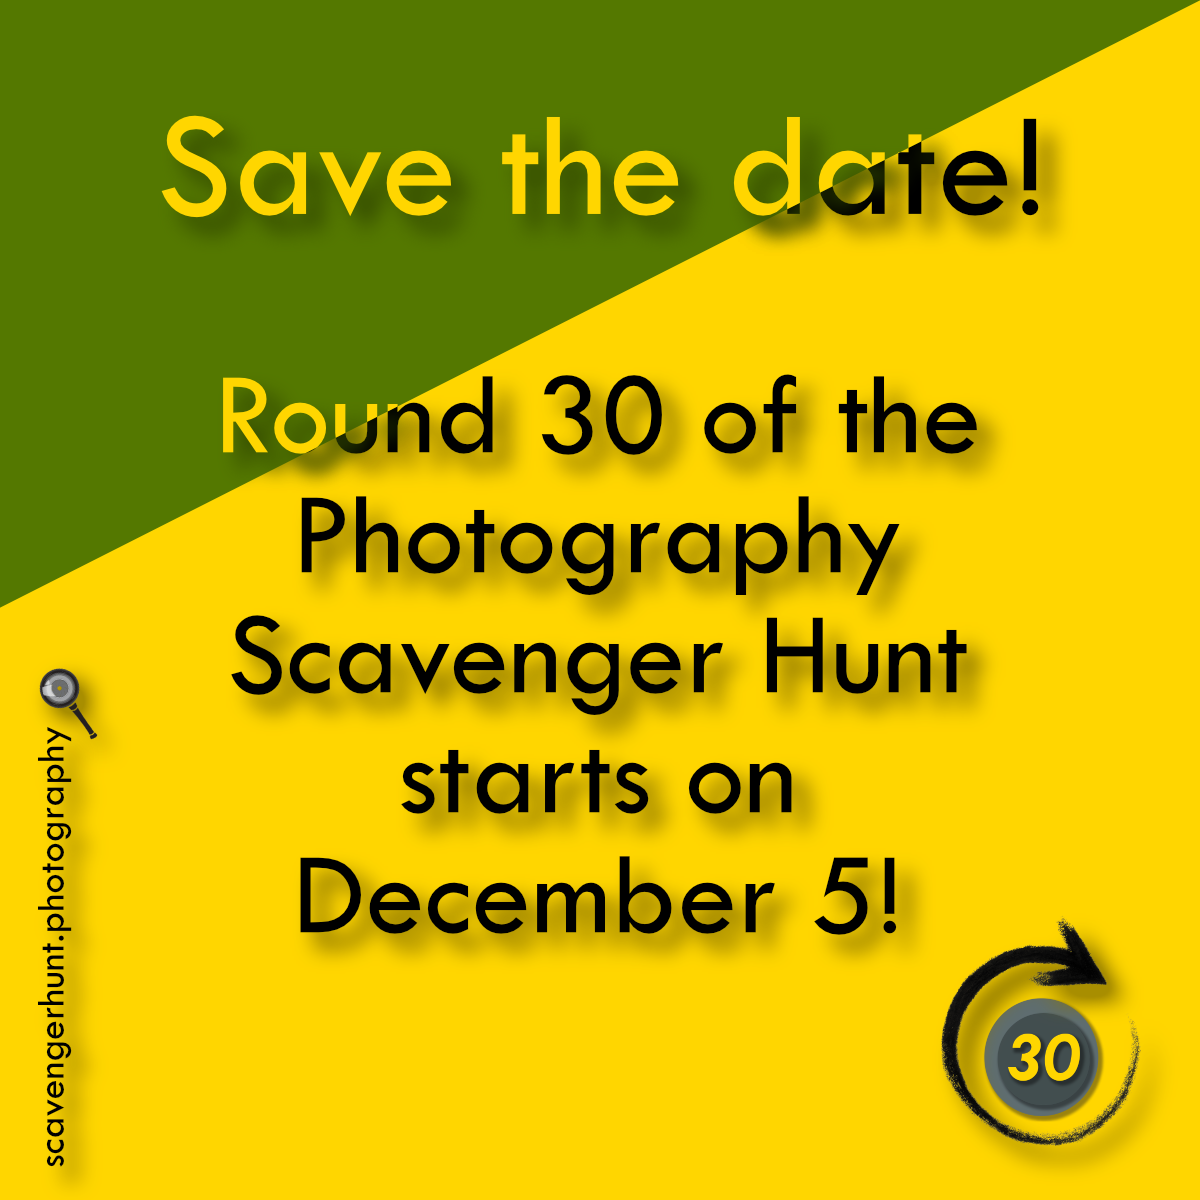 Save the Date for Round 30 of the Scavenger Hunt - December 5 2020